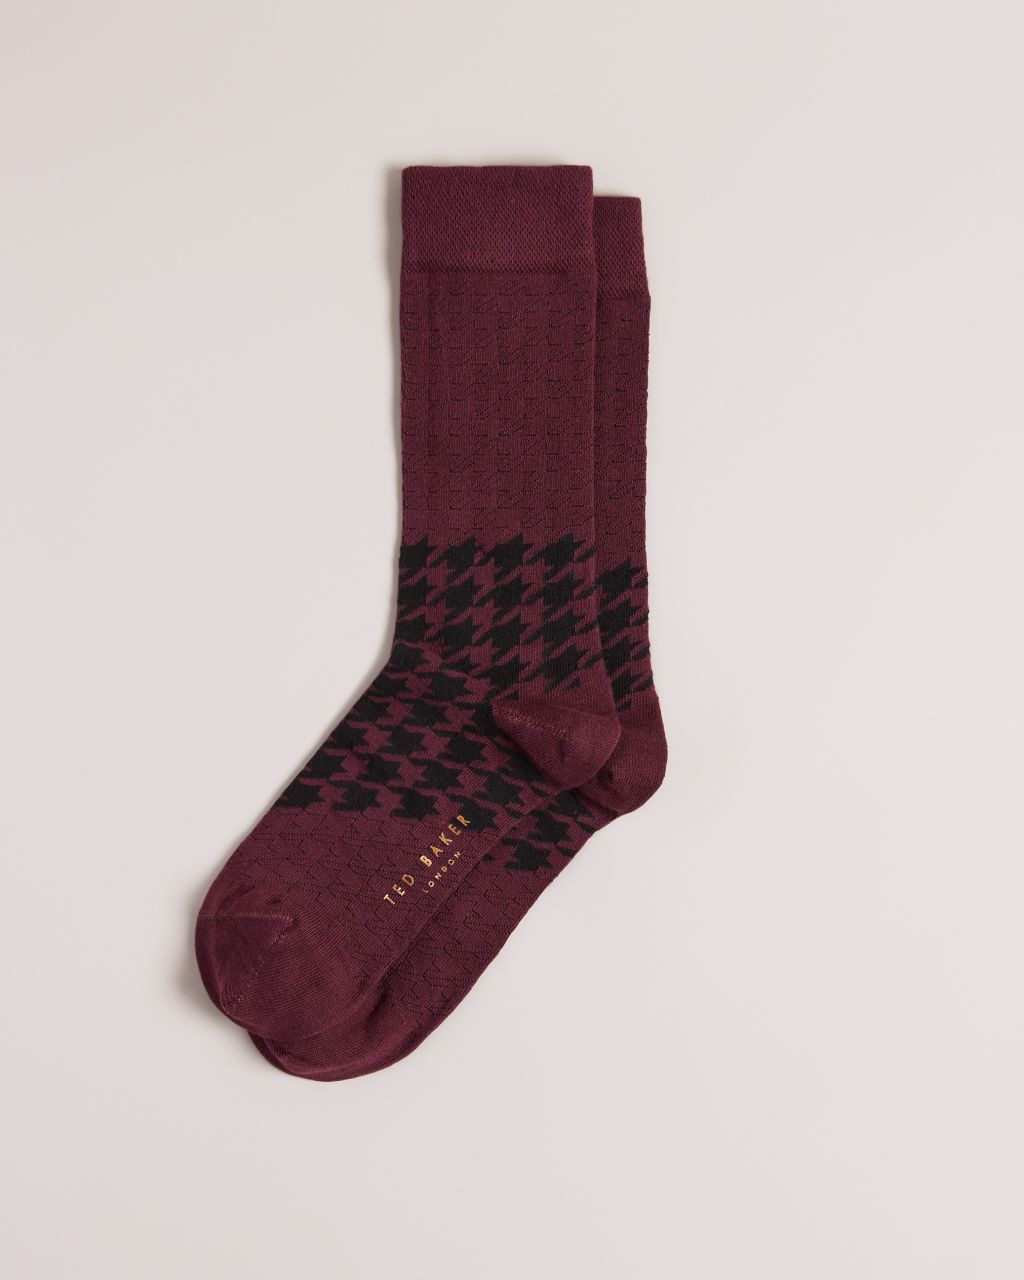 ted baker dog tooth pattern socks in dark red patpats, men's accessories